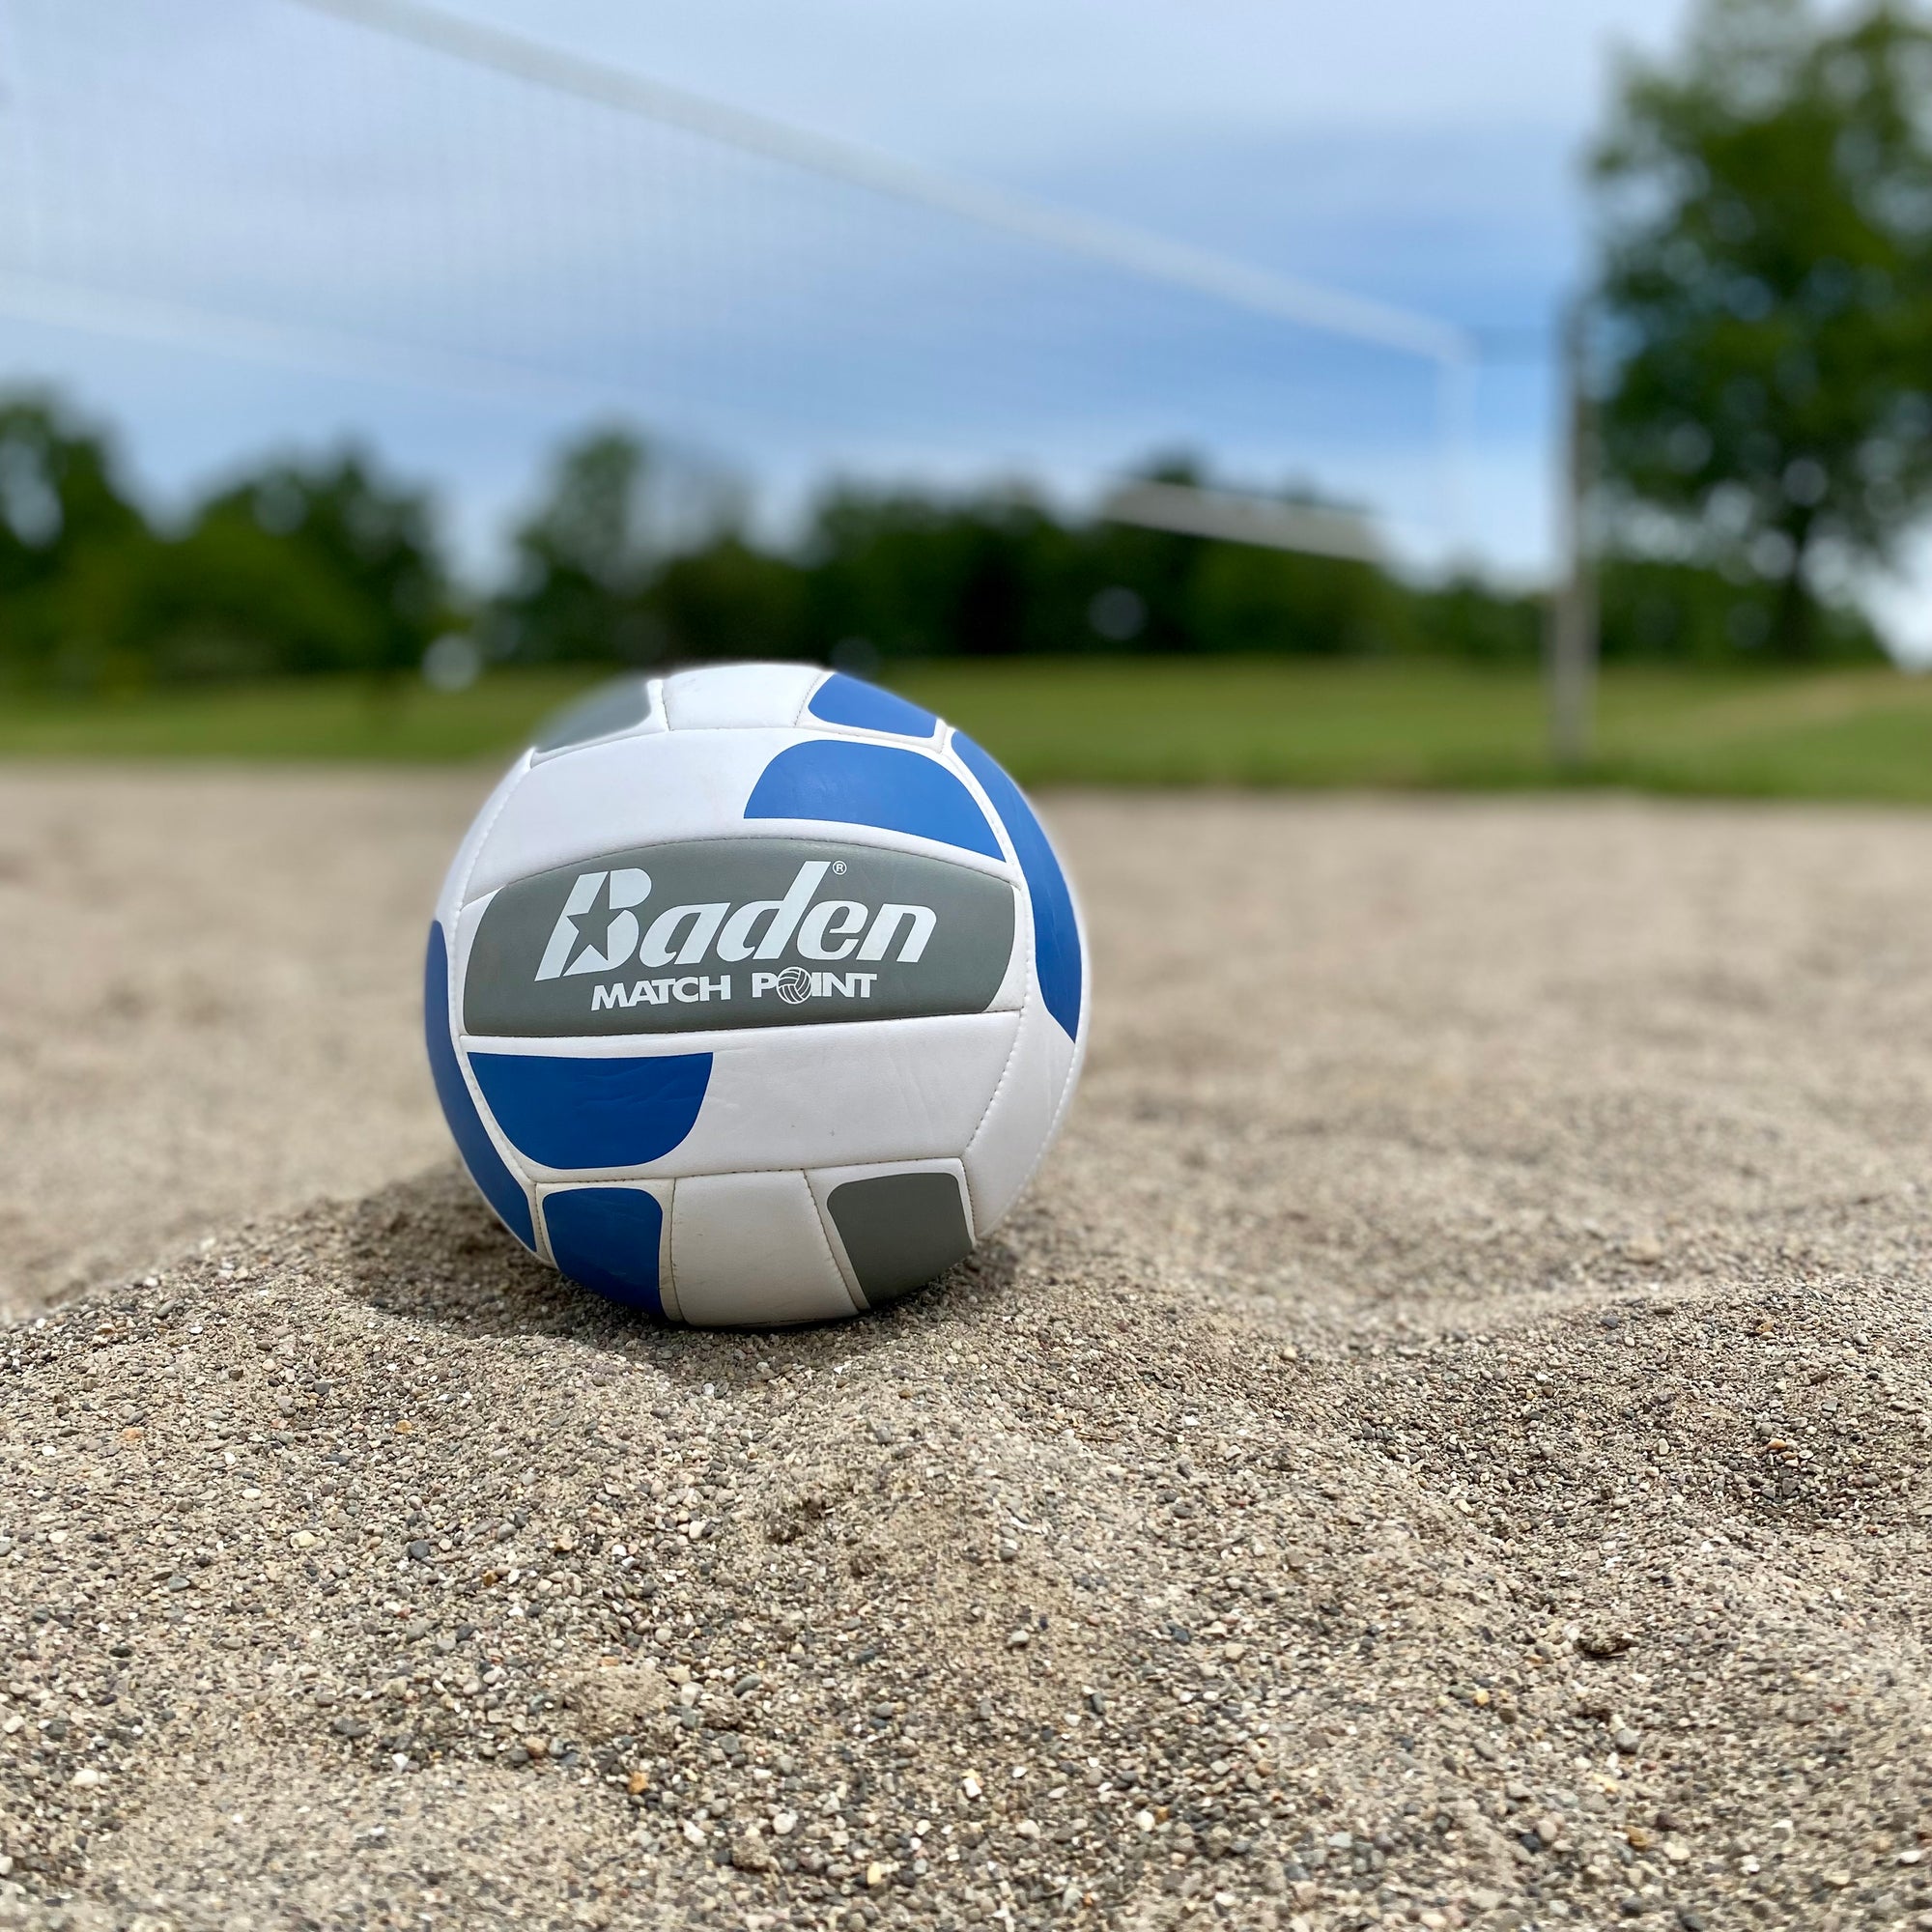 volley ball on a sand court with net in background